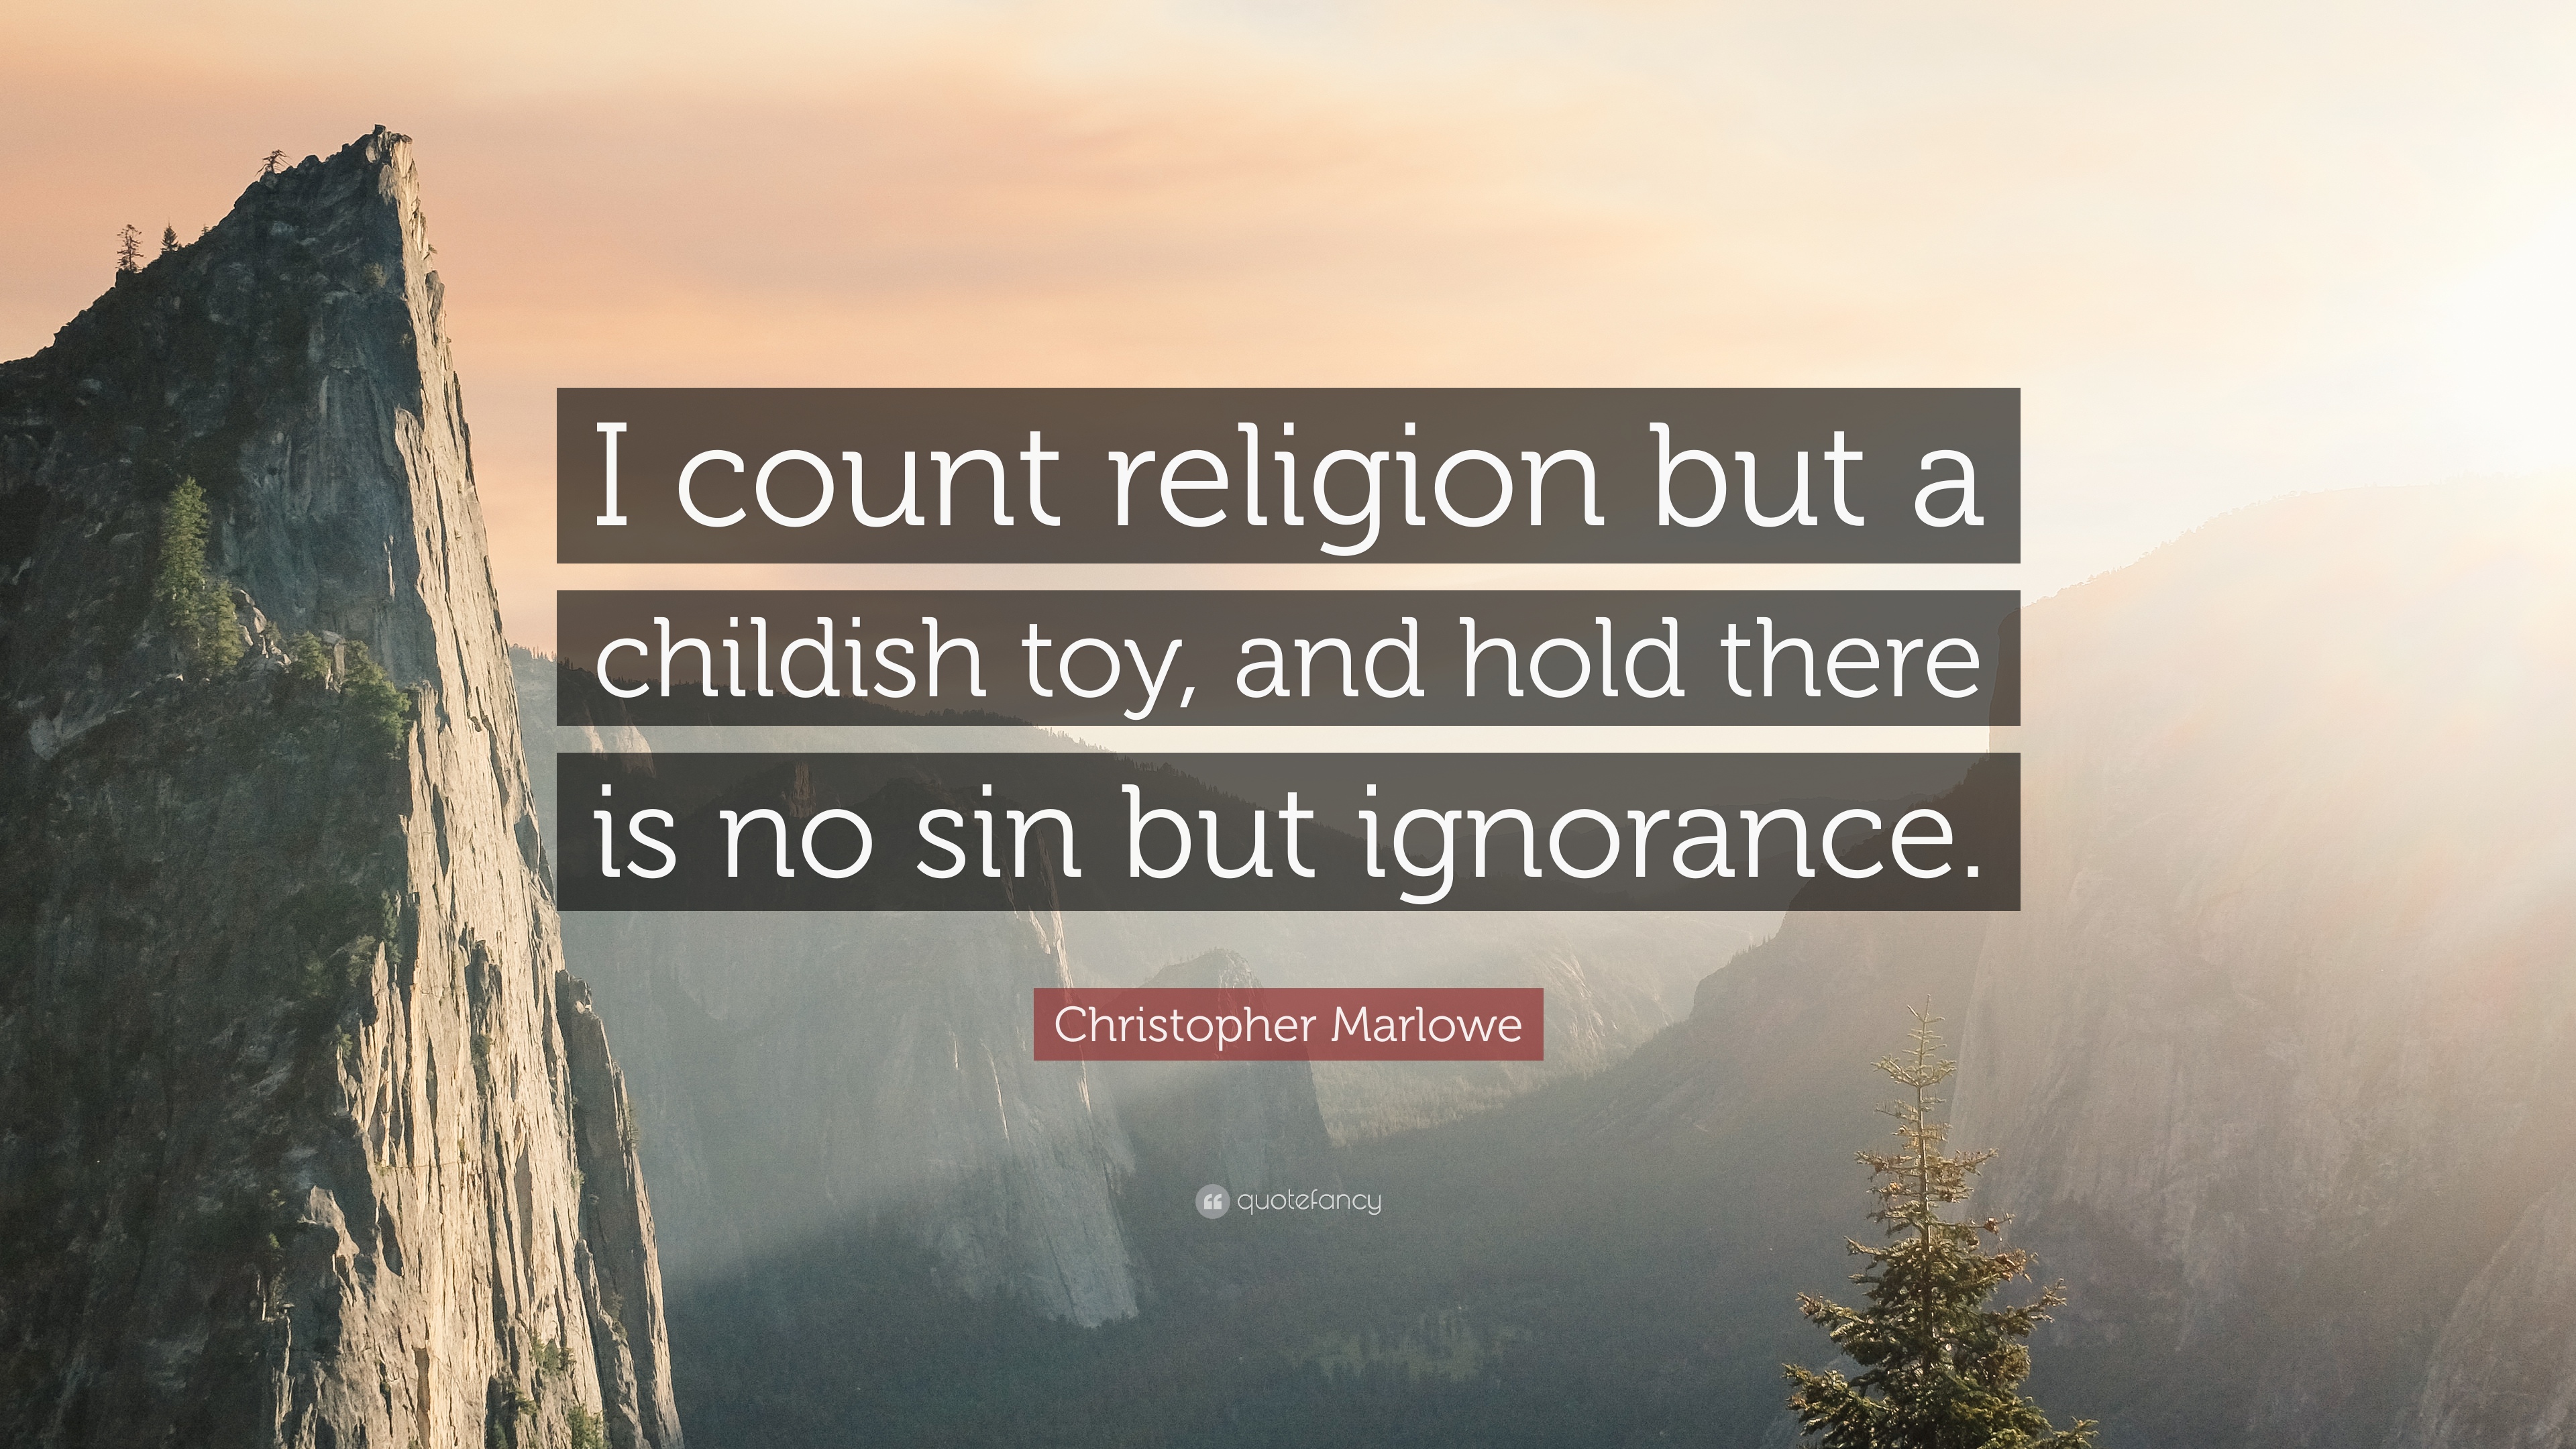 I count religion but a childish toy, and hold there is no sin but ignorance. christopher marlowe